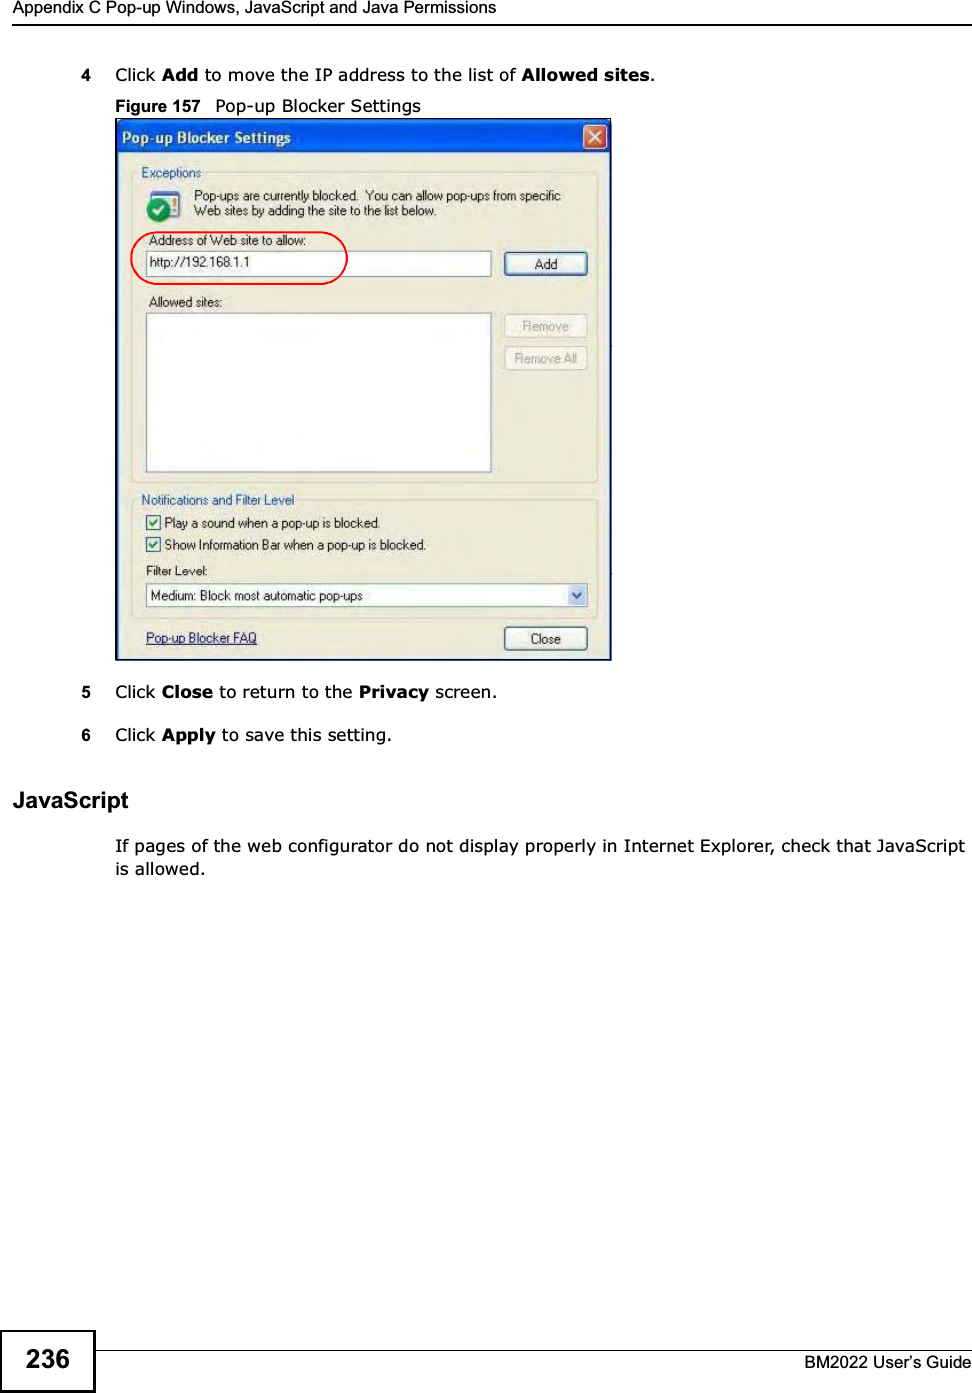 Appendix C Pop-up Windows, JavaScript and Java PermissionsBM2022 Users Guide2364Click Add to move the IP address to the list of Allowed sites.Figure 157   Pop-up Blocker Settings5Click Close to return to the Privacy screen. 6Click Apply to save this setting. JavaScriptIf pages of the web configurator do not display properly in Internet Explorer, check that JavaScript is allowed. 